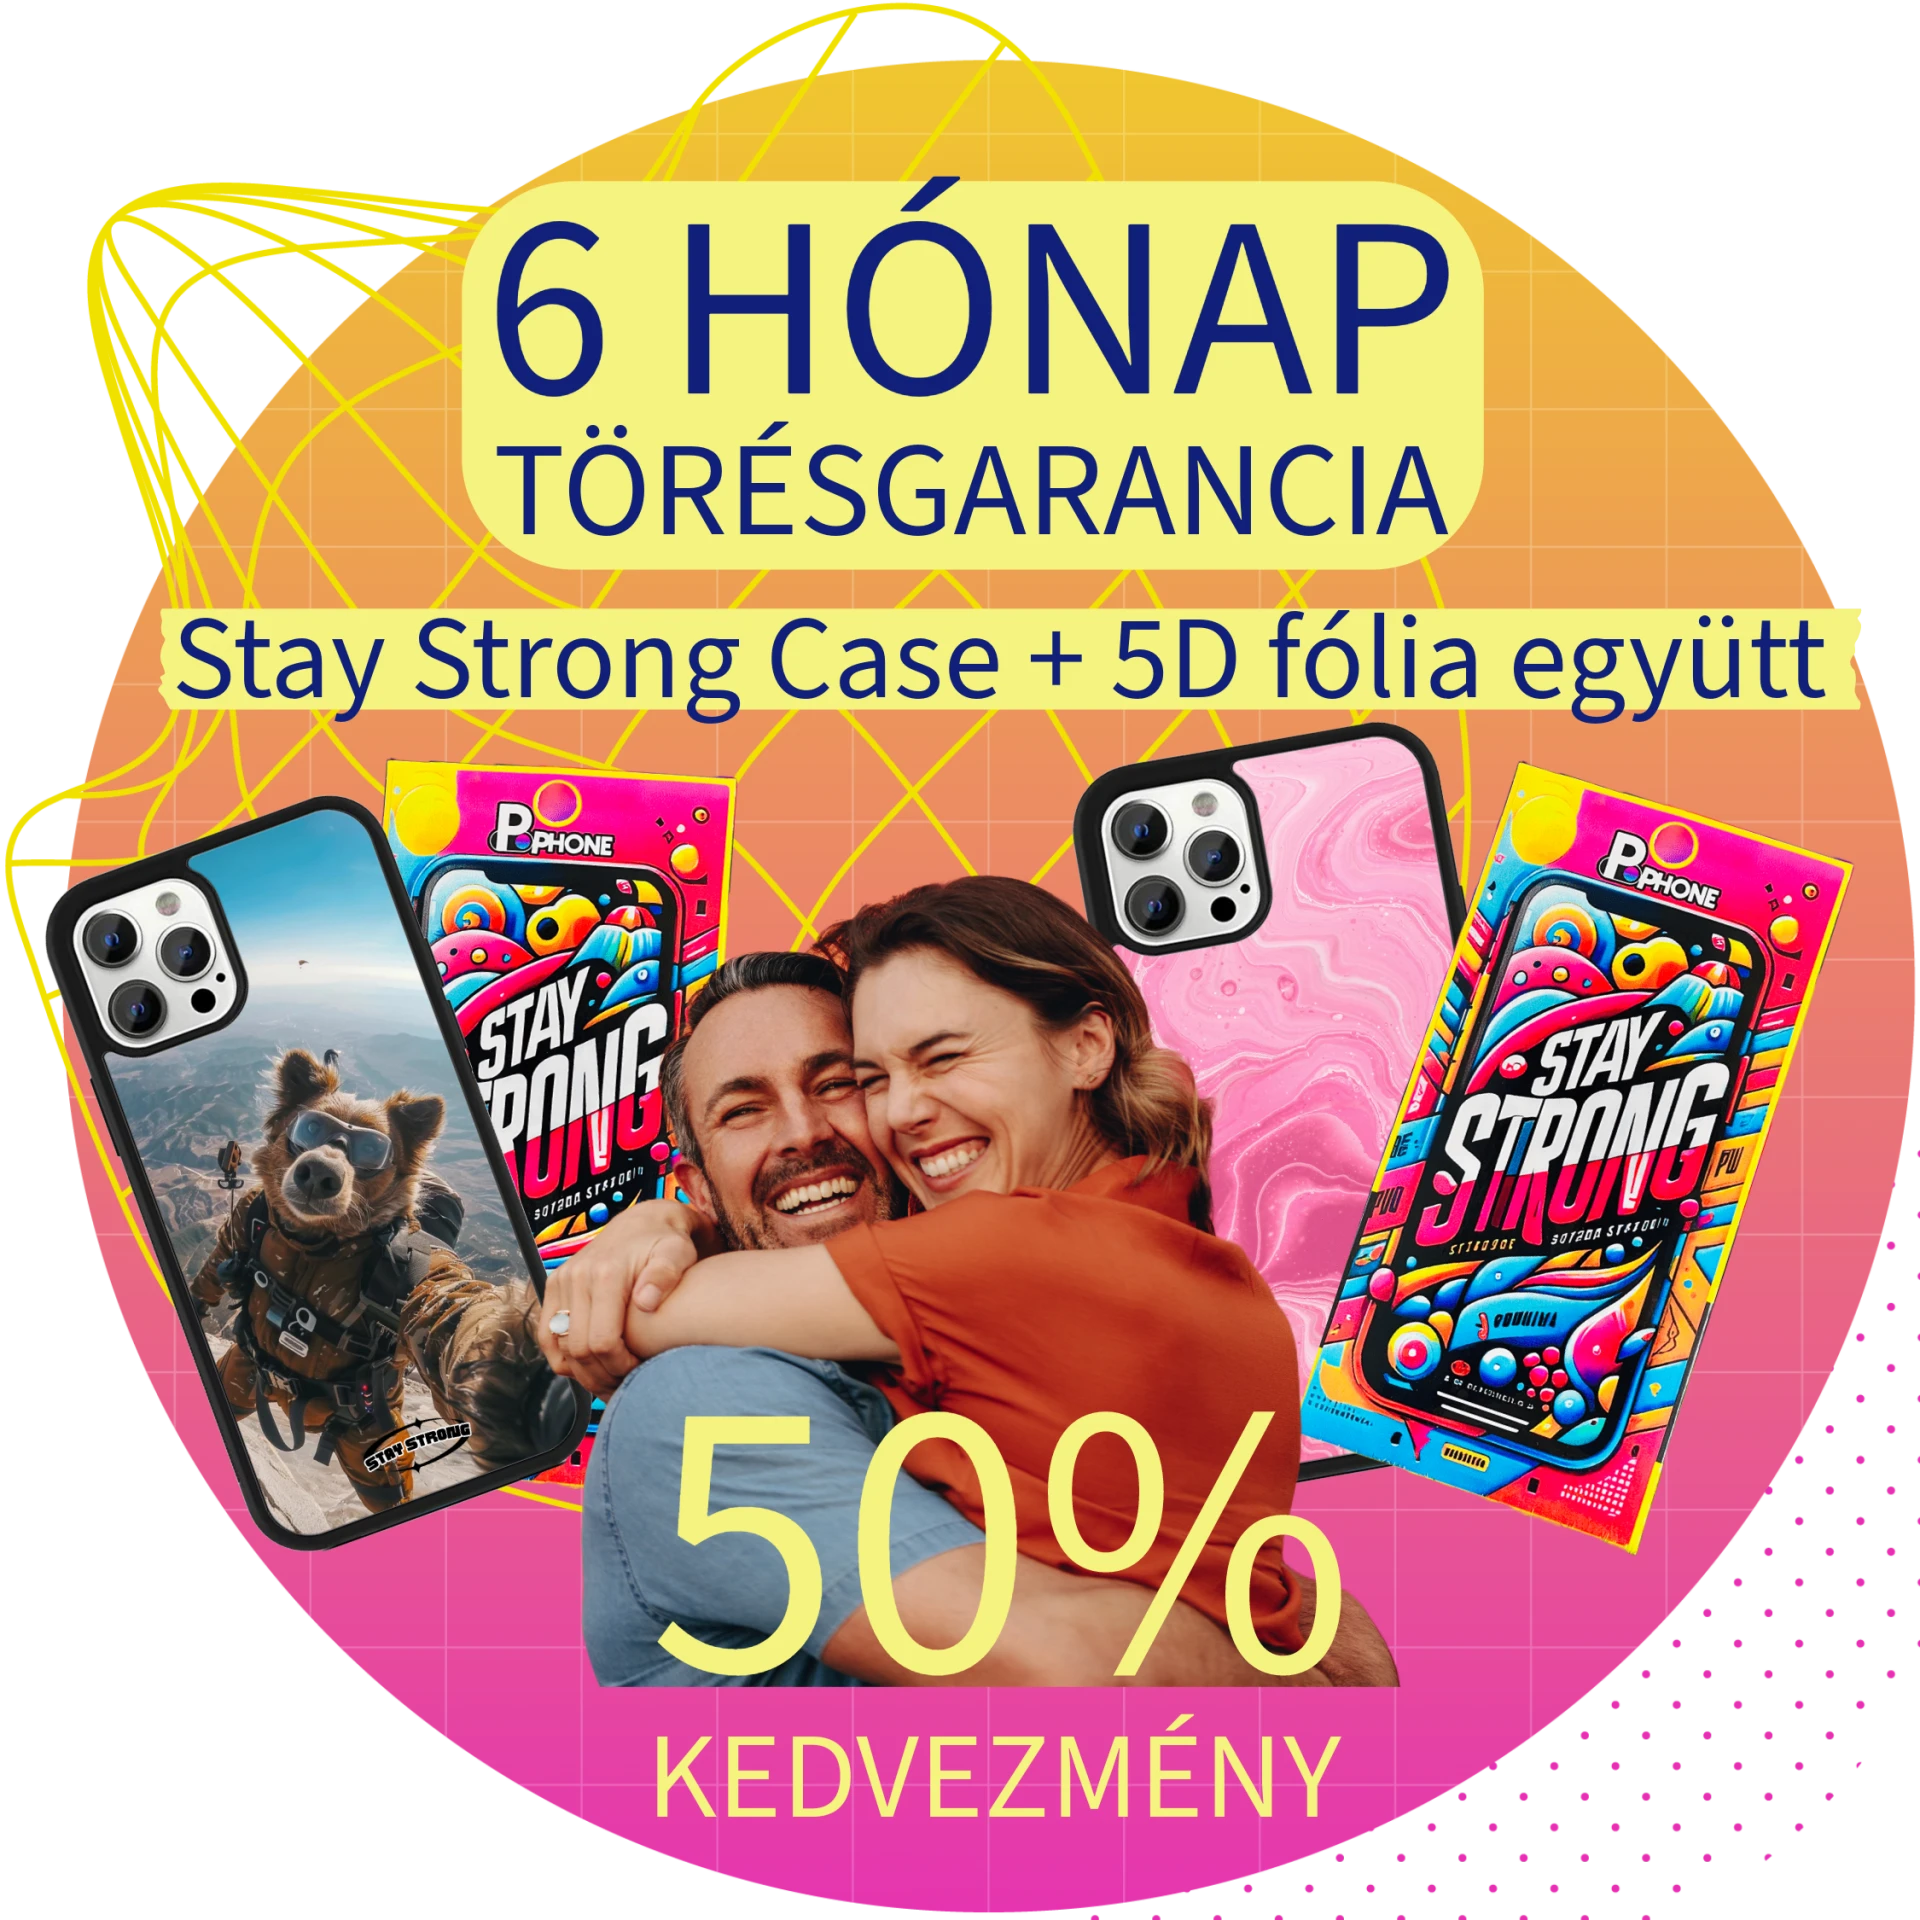 Stay Strong case + fólia